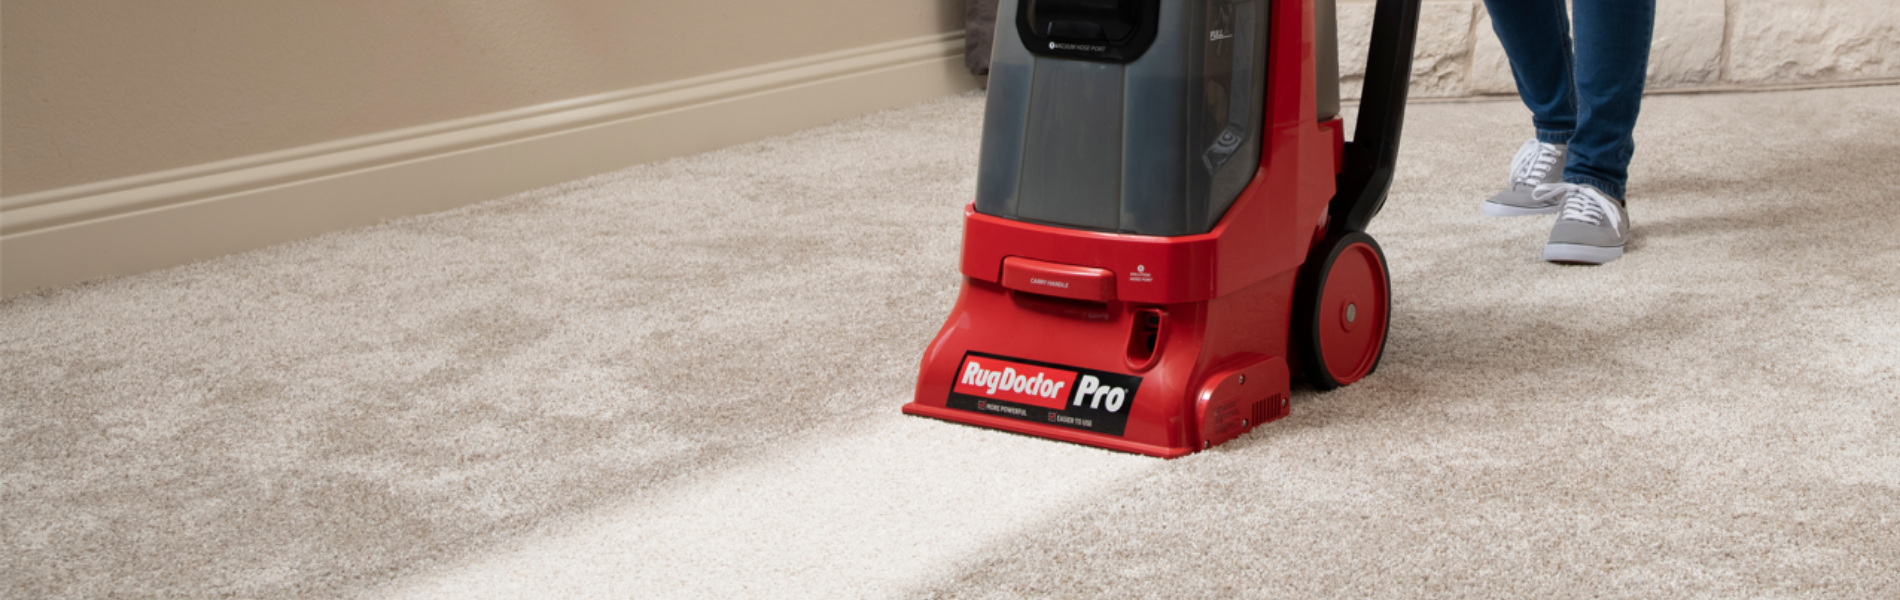 Pro Deep Carpet Cleaner leaving a clean path through dirty carpet to show the difference it makes